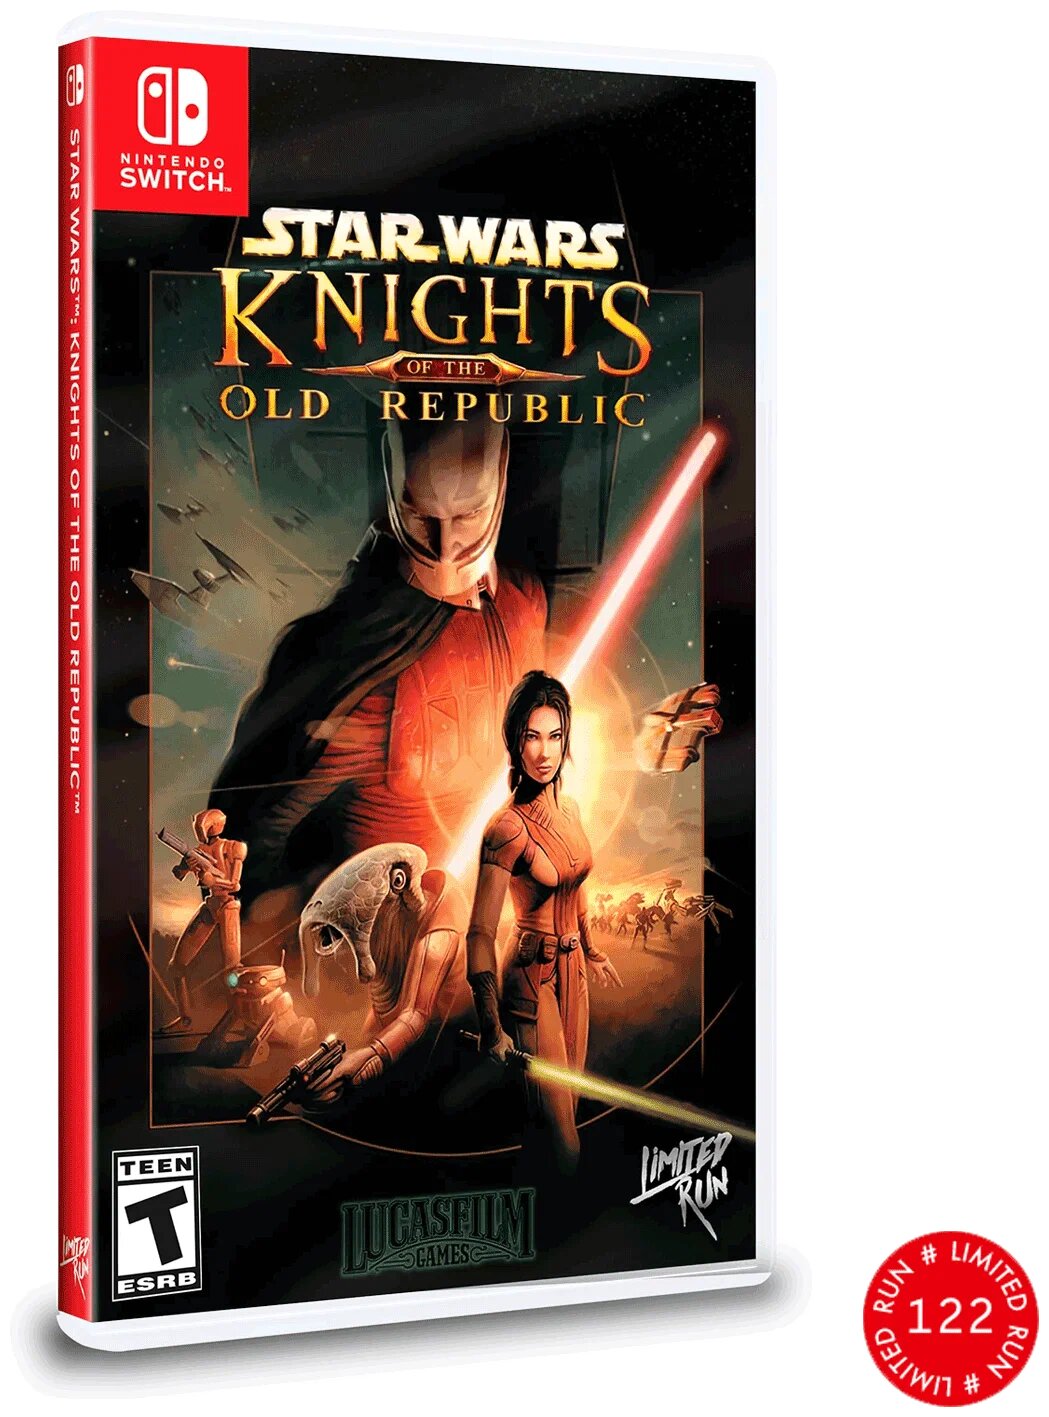 Игра Star Wars: Knights of the Old Republic (Switch картридж)